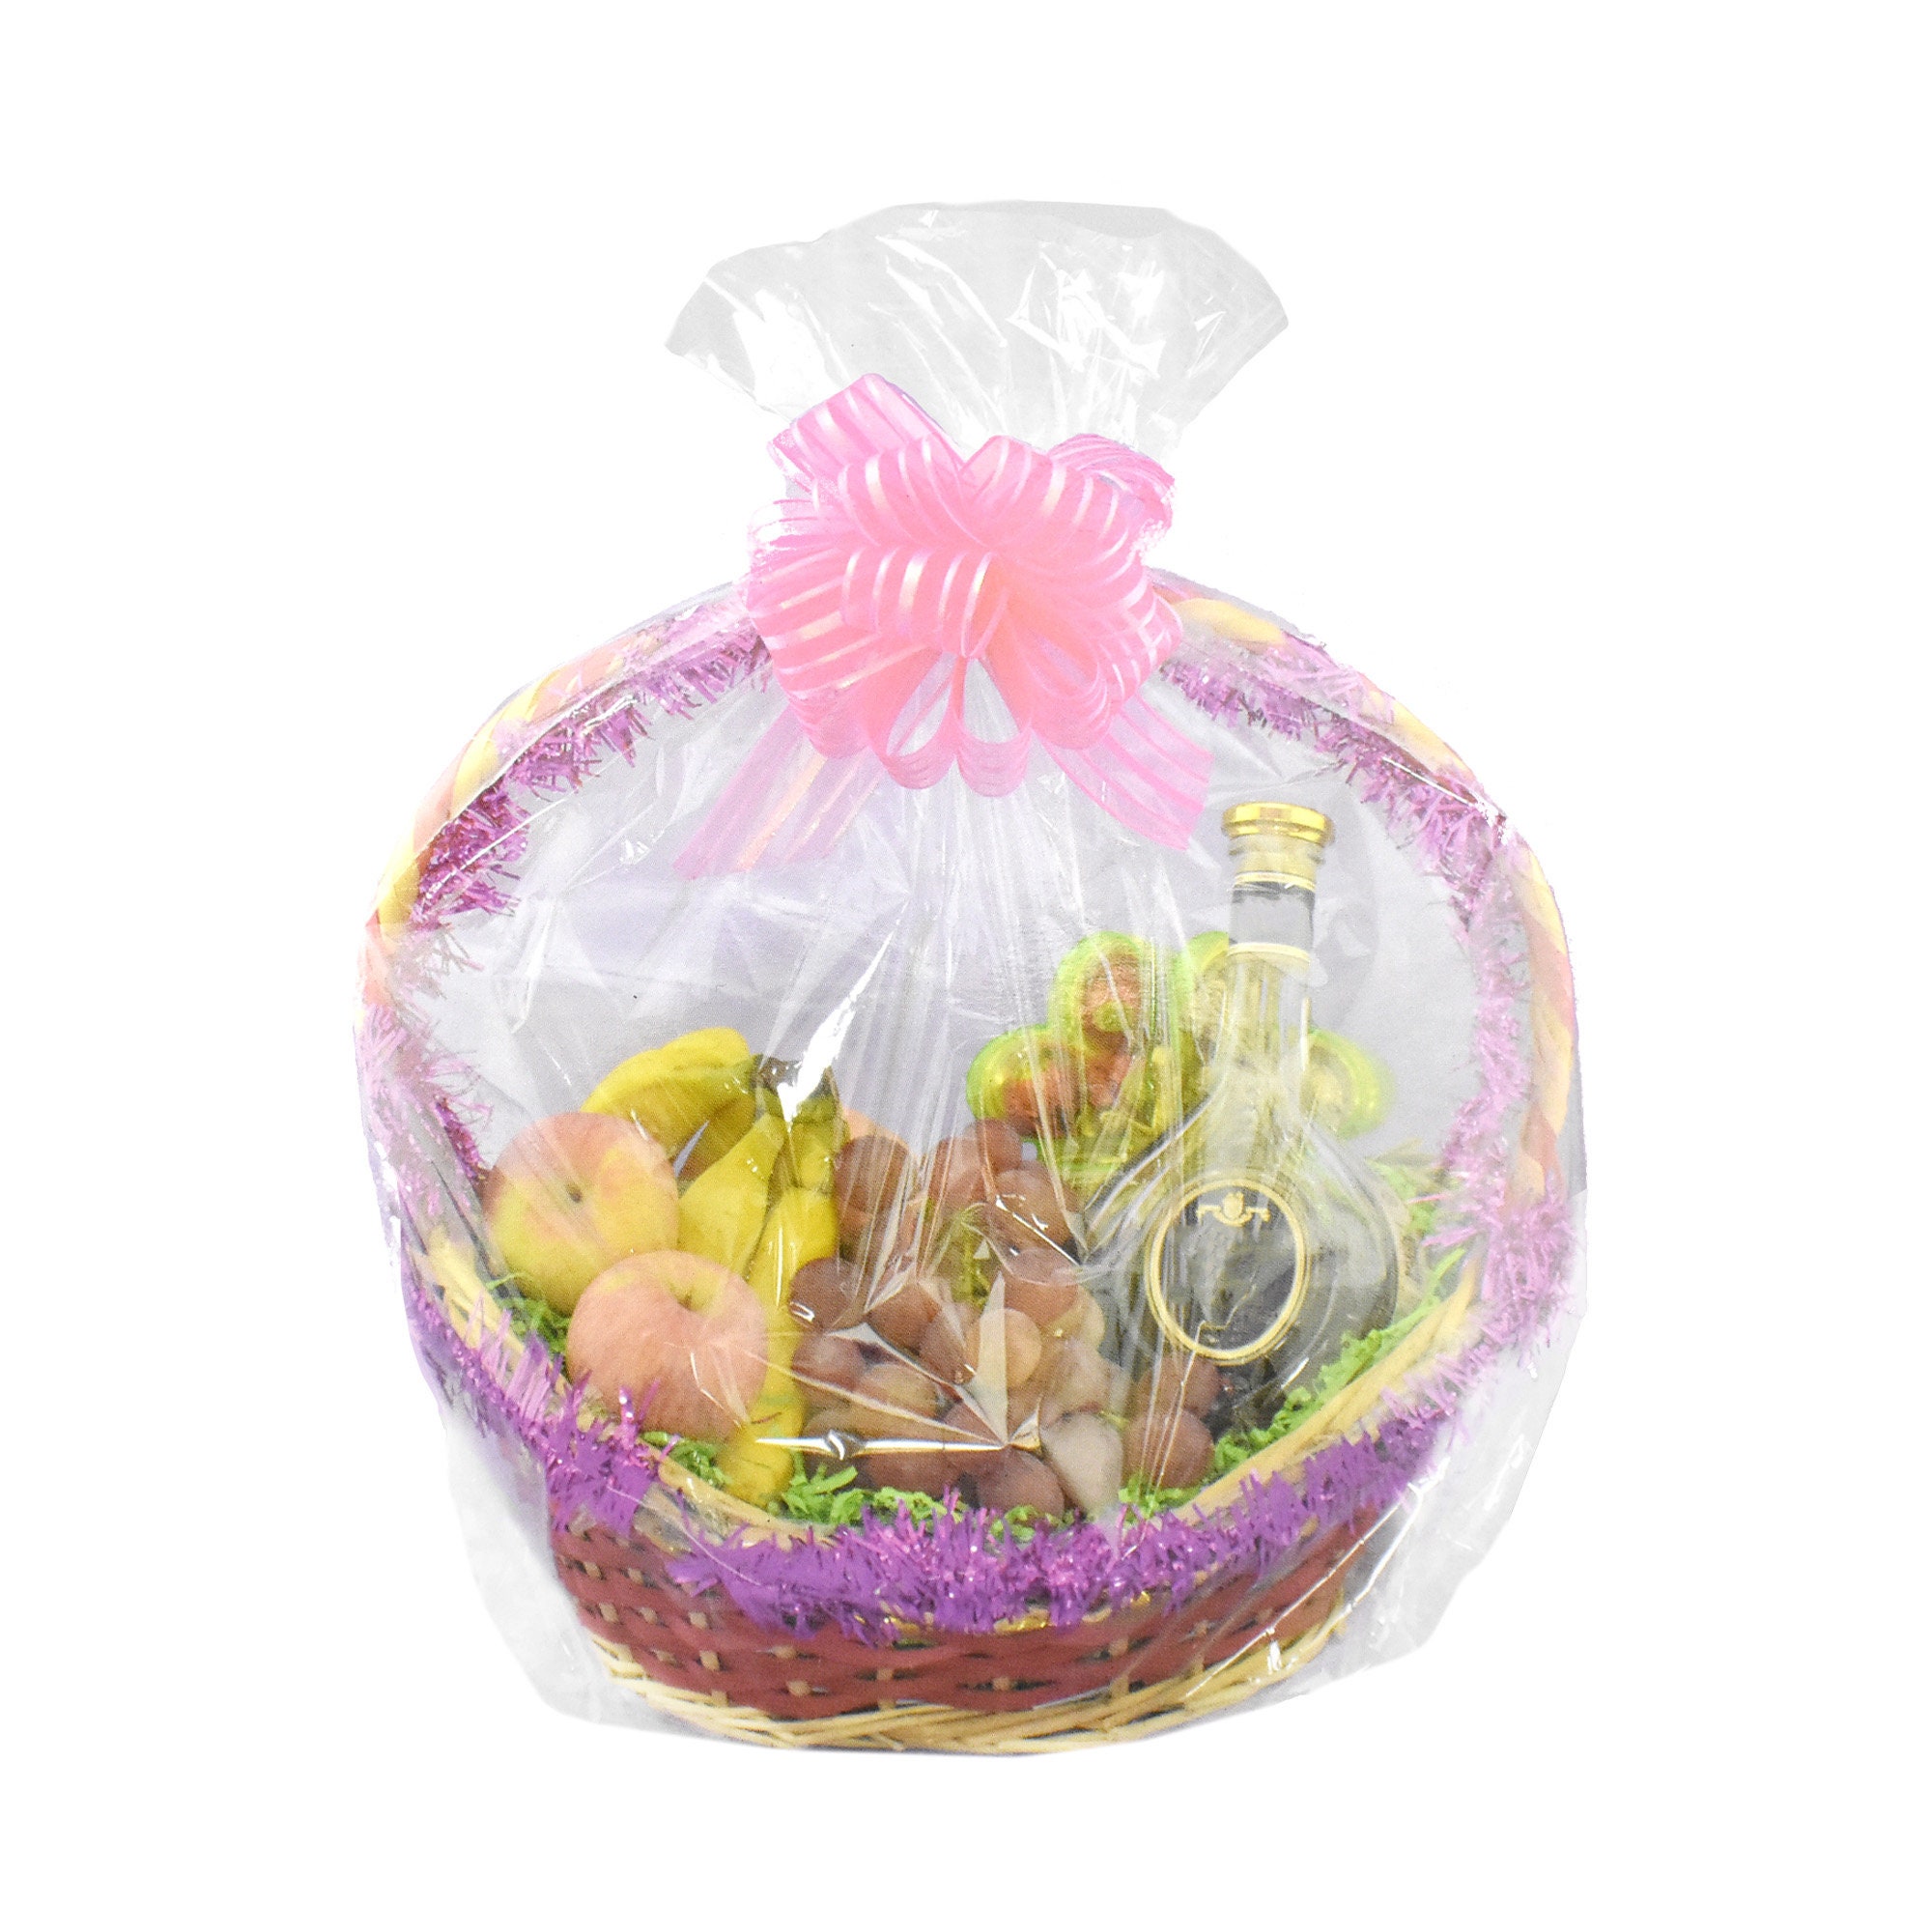 Clear Cellophane Bags Basket Bags Cello Gift Bags Large Flat Bag 41cm . x 60cm . 10 Pack